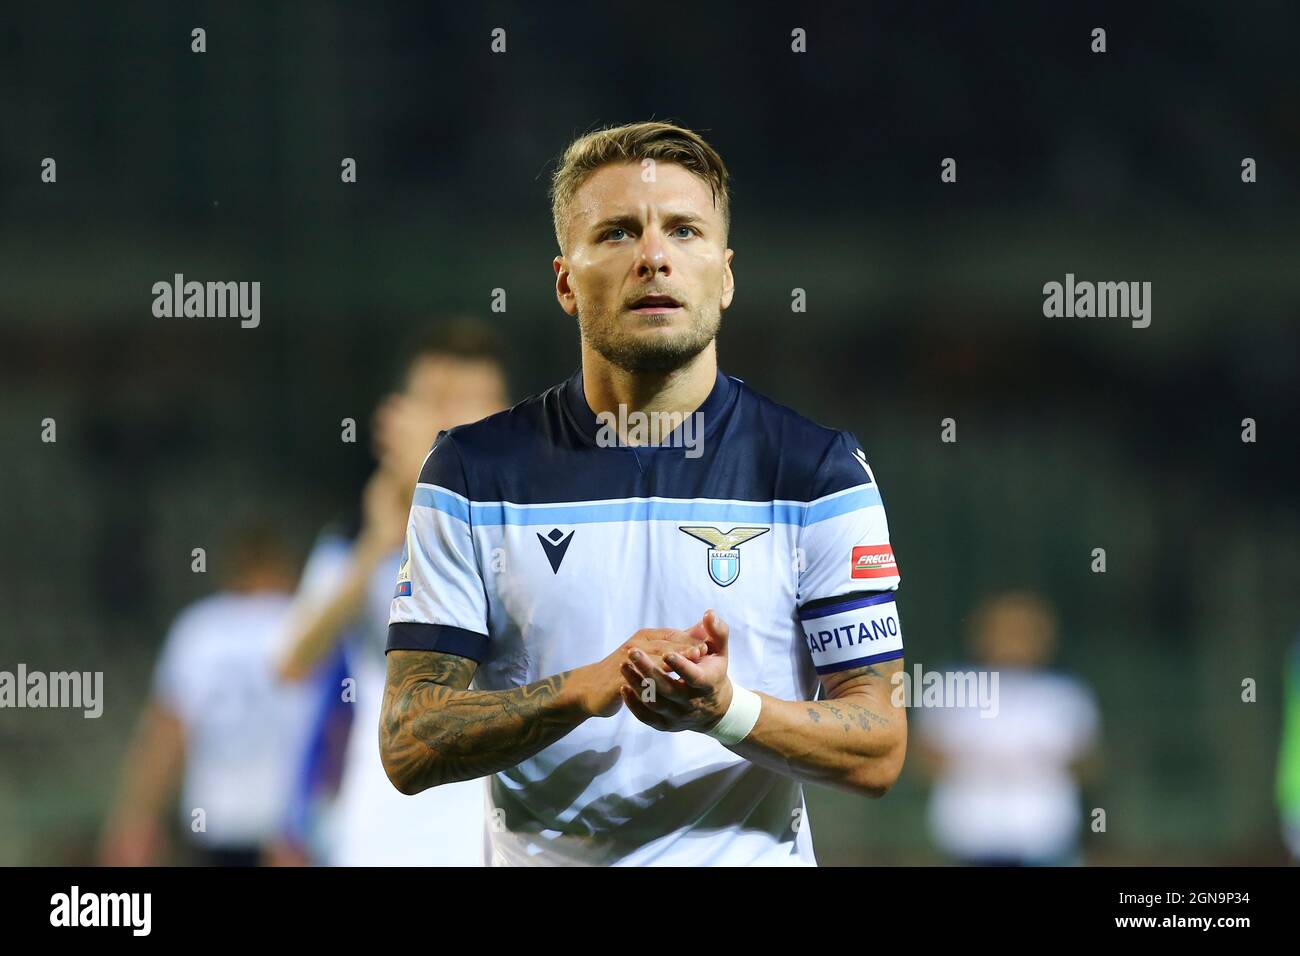 TURIN, ITALY. 23 SEPTEMBER 2021. Ciro Immobile of SS Lazio after the Serie A match between Torino FC and SS Lazio BC on 23 September 2021 at Olympic Grande Torino Stadium. Credit: Massimiliano Ferraro/Medialys Images/Alamy Live News Stock Photo